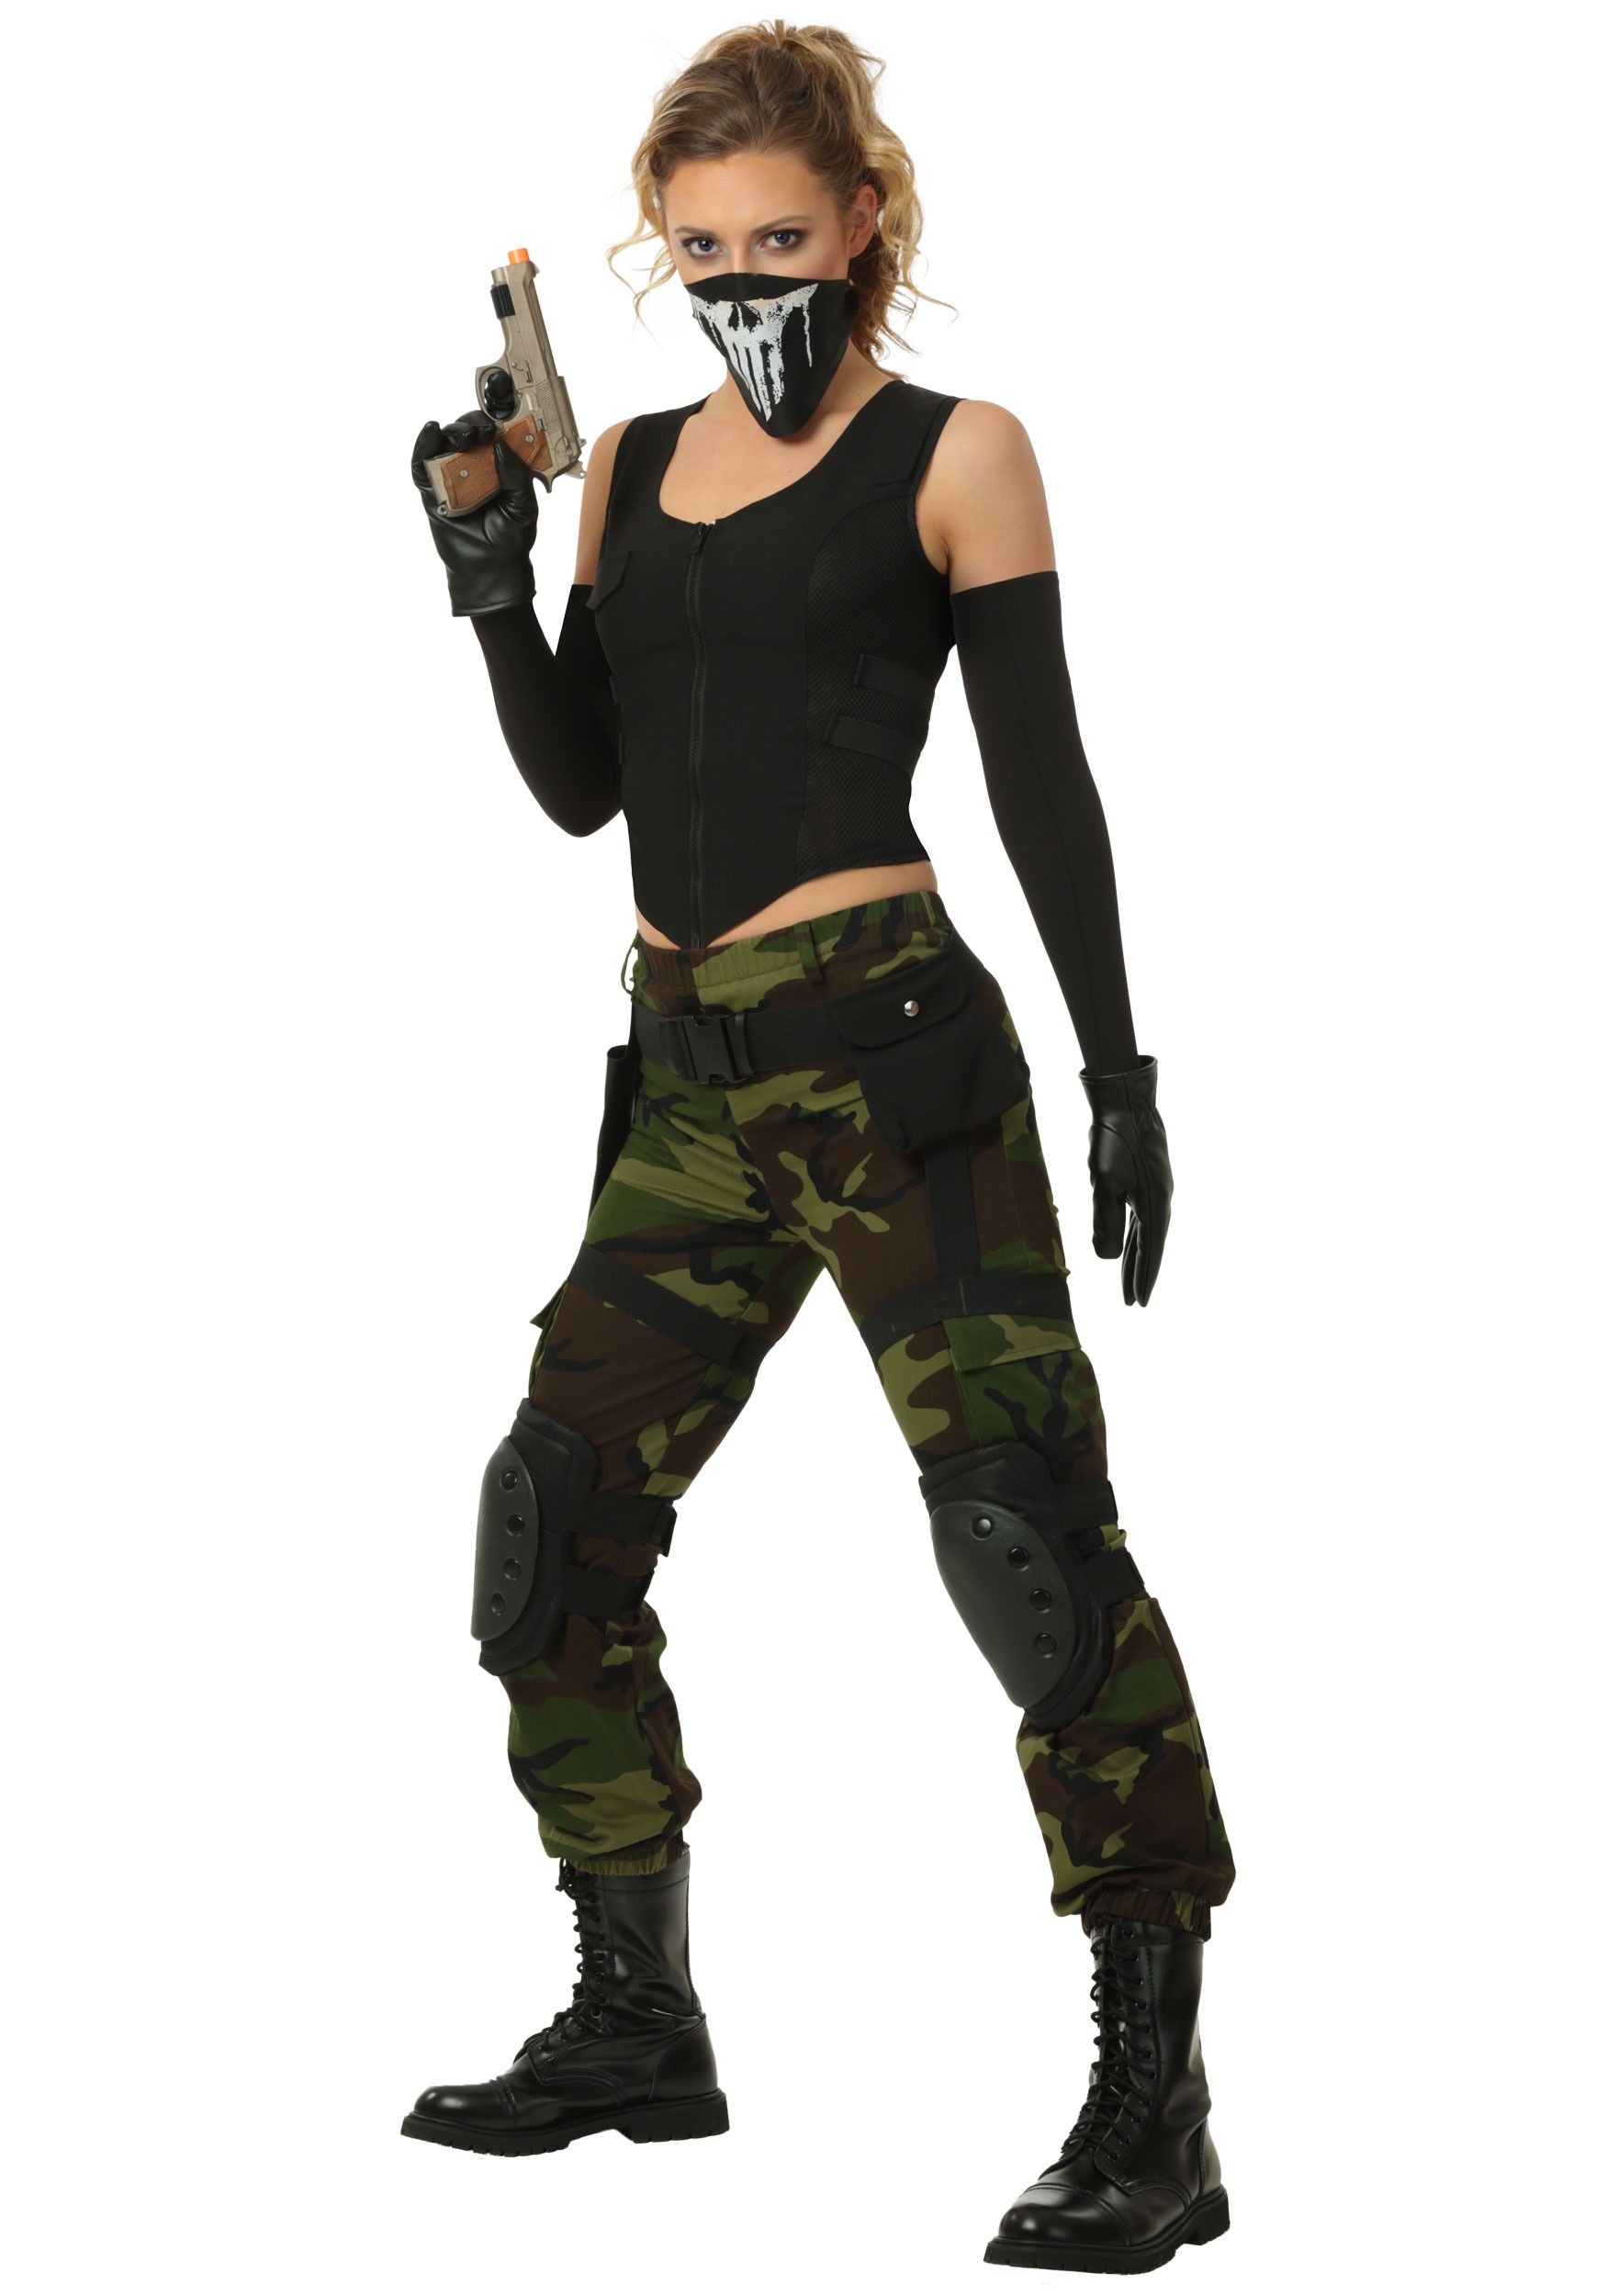 Adult Army Soldier Women Costume, $97.99